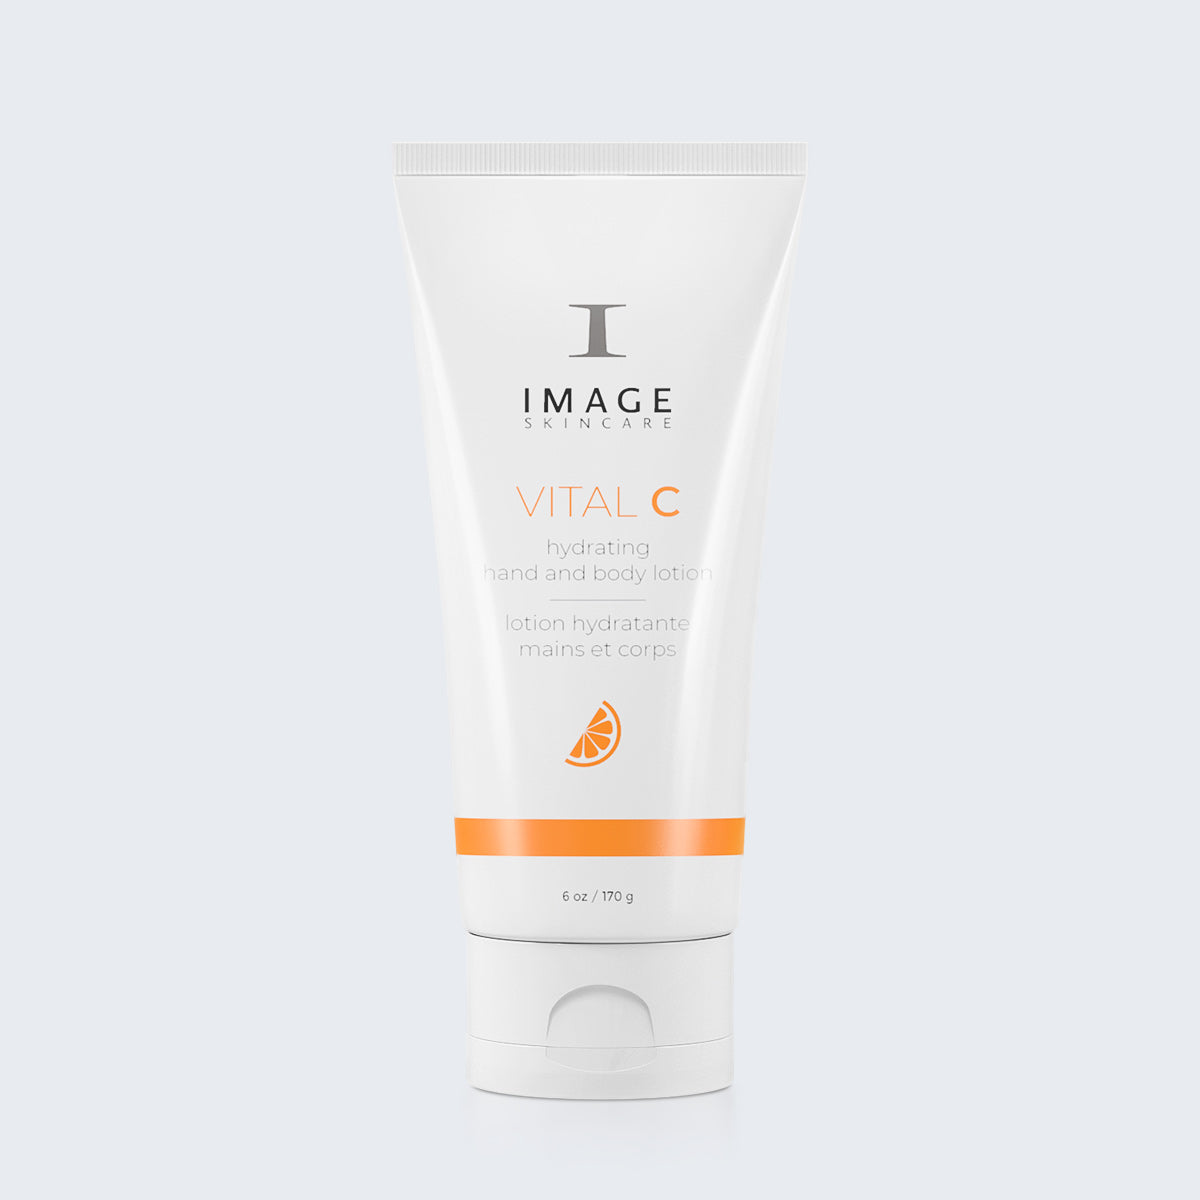 IMAGE | VITAL C Hydrating Hand and Body Lotion (6 oz)